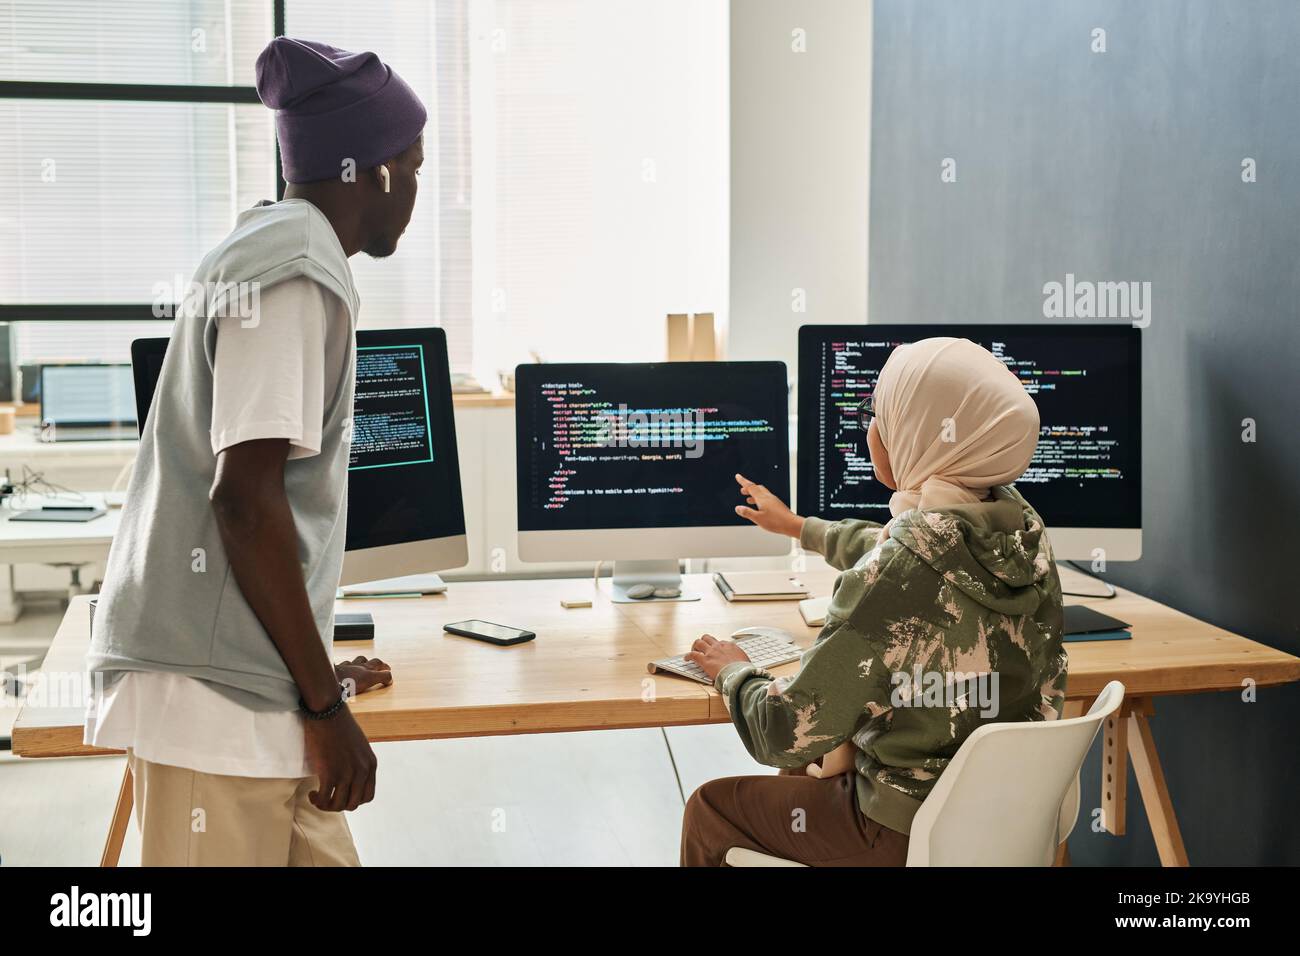 Young confident Muslim woman in hijab making presentation of decoded data on computer screen to African American male colleague Stock Photo